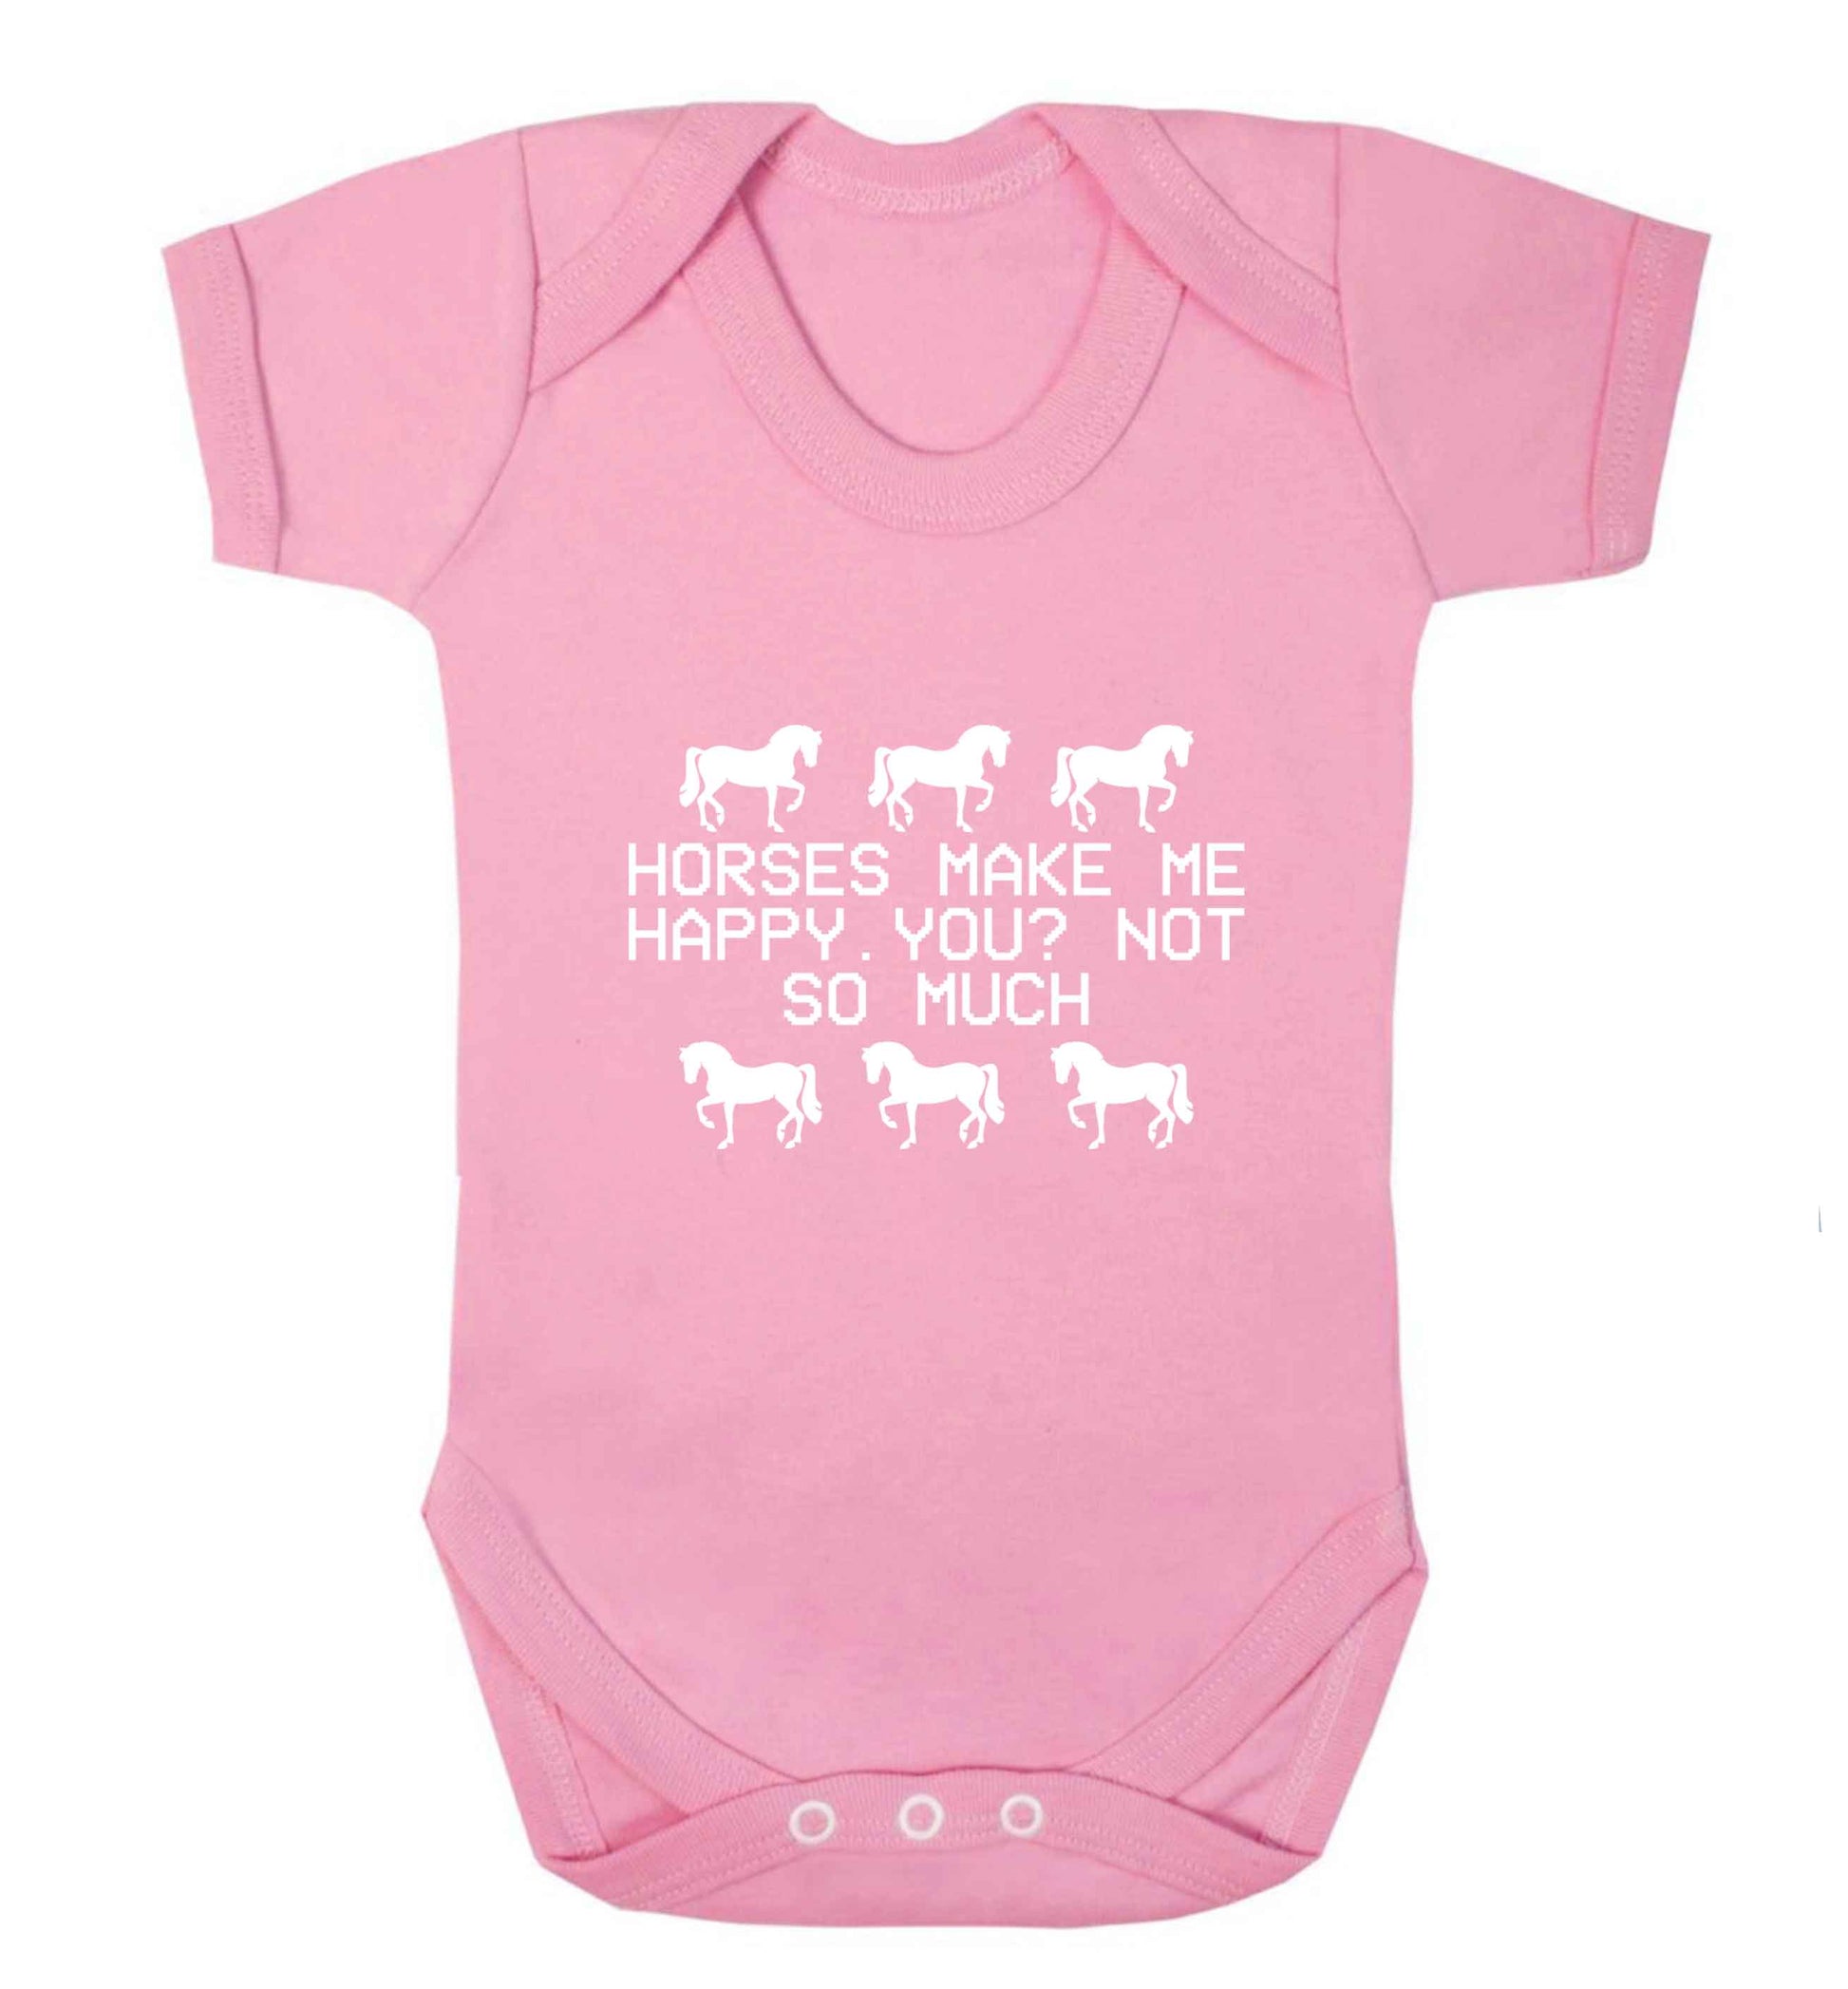 Horses make me happy, you not so much baby vest pale pink 18-24 months